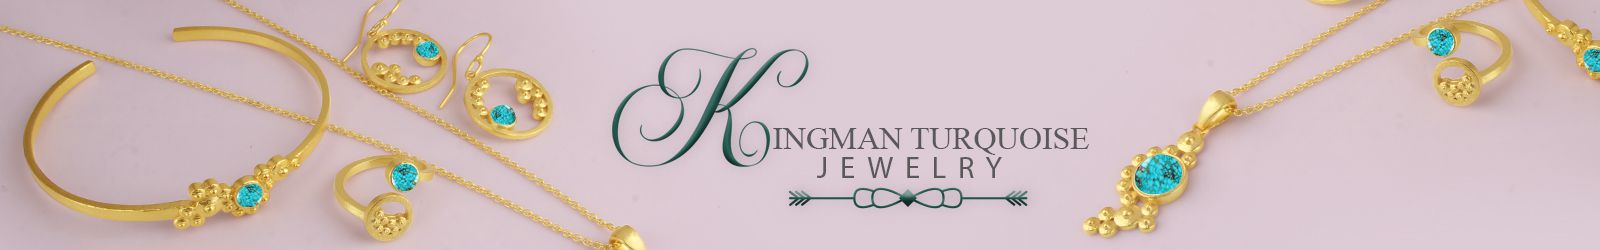 Silver Kingman Turquoise Jewelry Wholesale Supplier